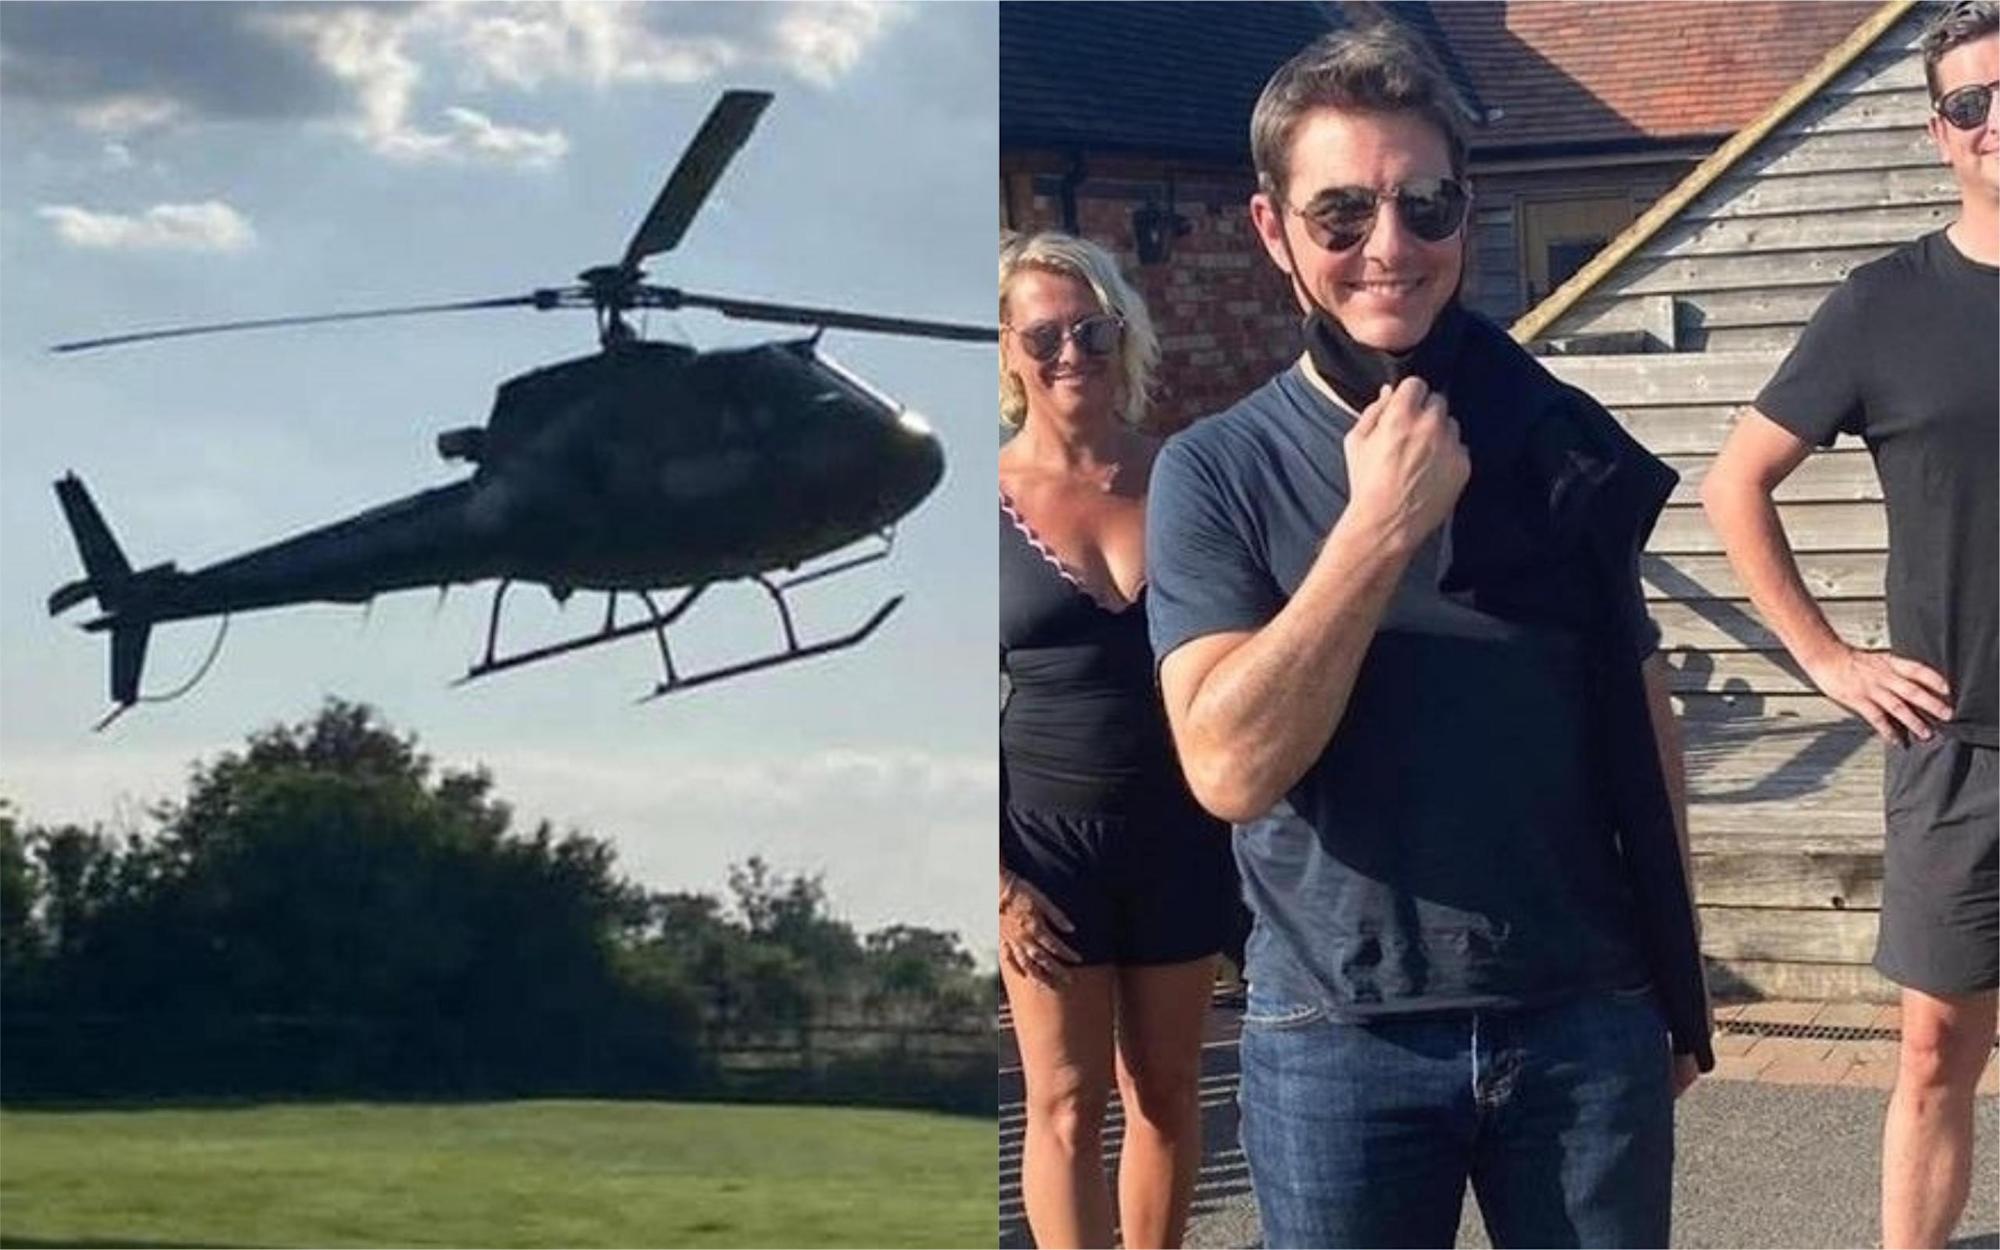 Tom Cruise lands helicopter in UK family’s garden, takes them for a ride: ‘It was surreal’